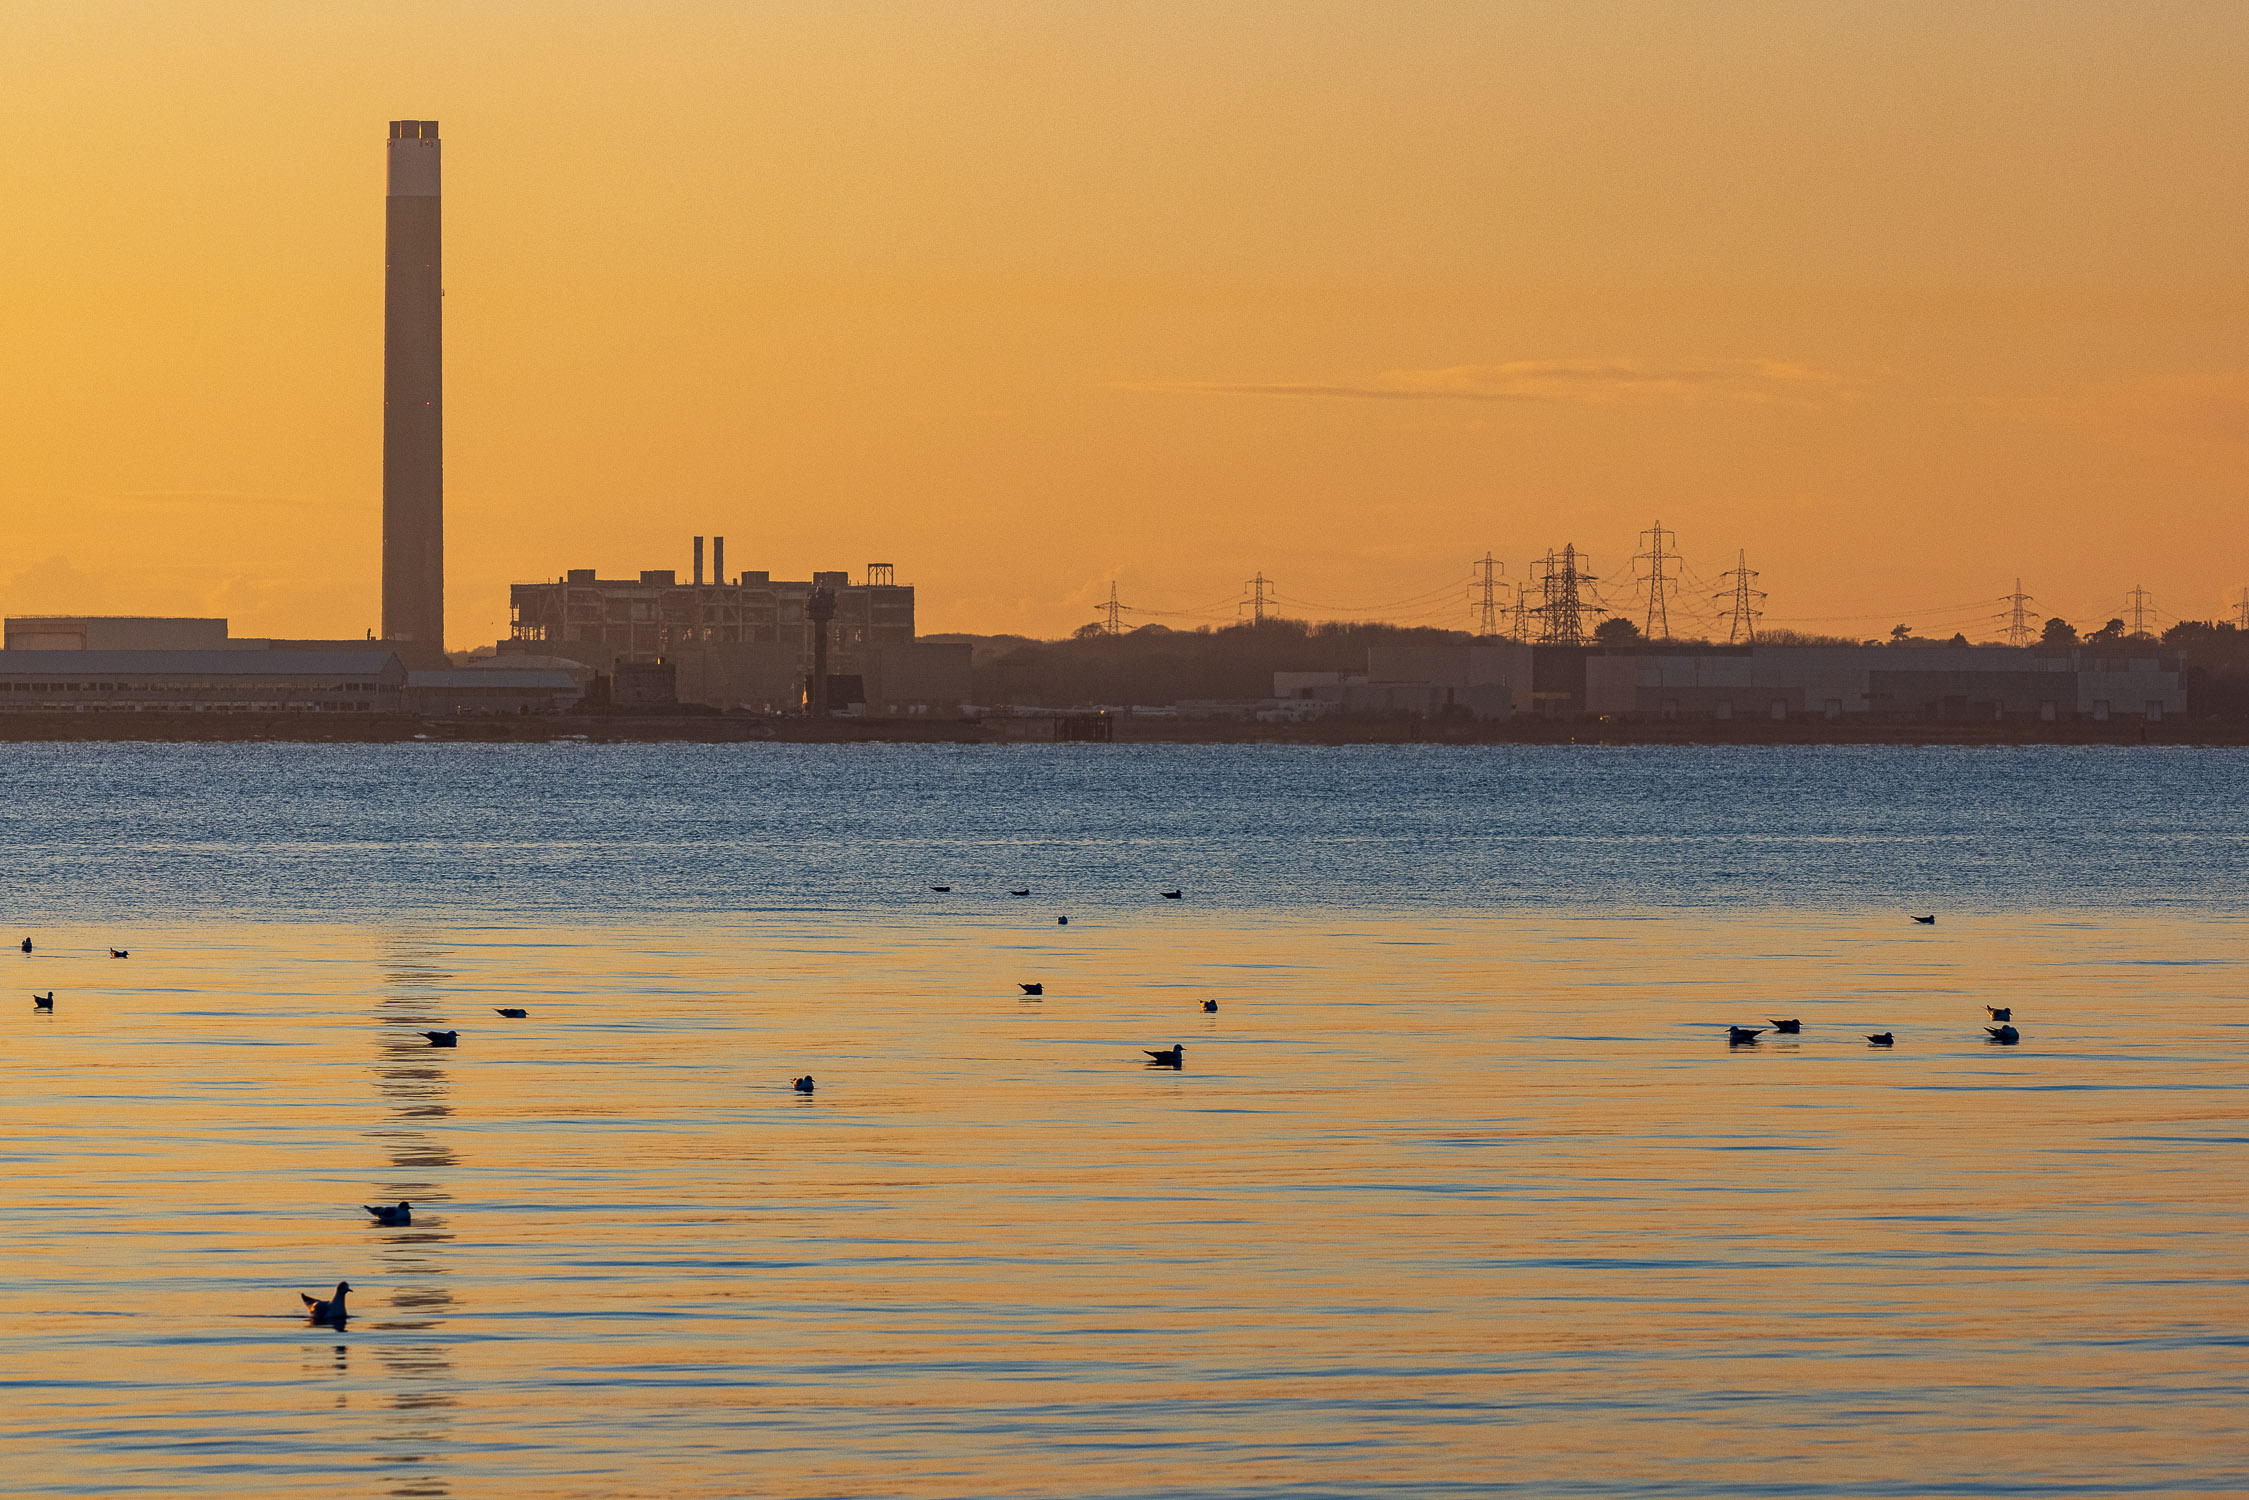 Old Fawley Power Station at sunset